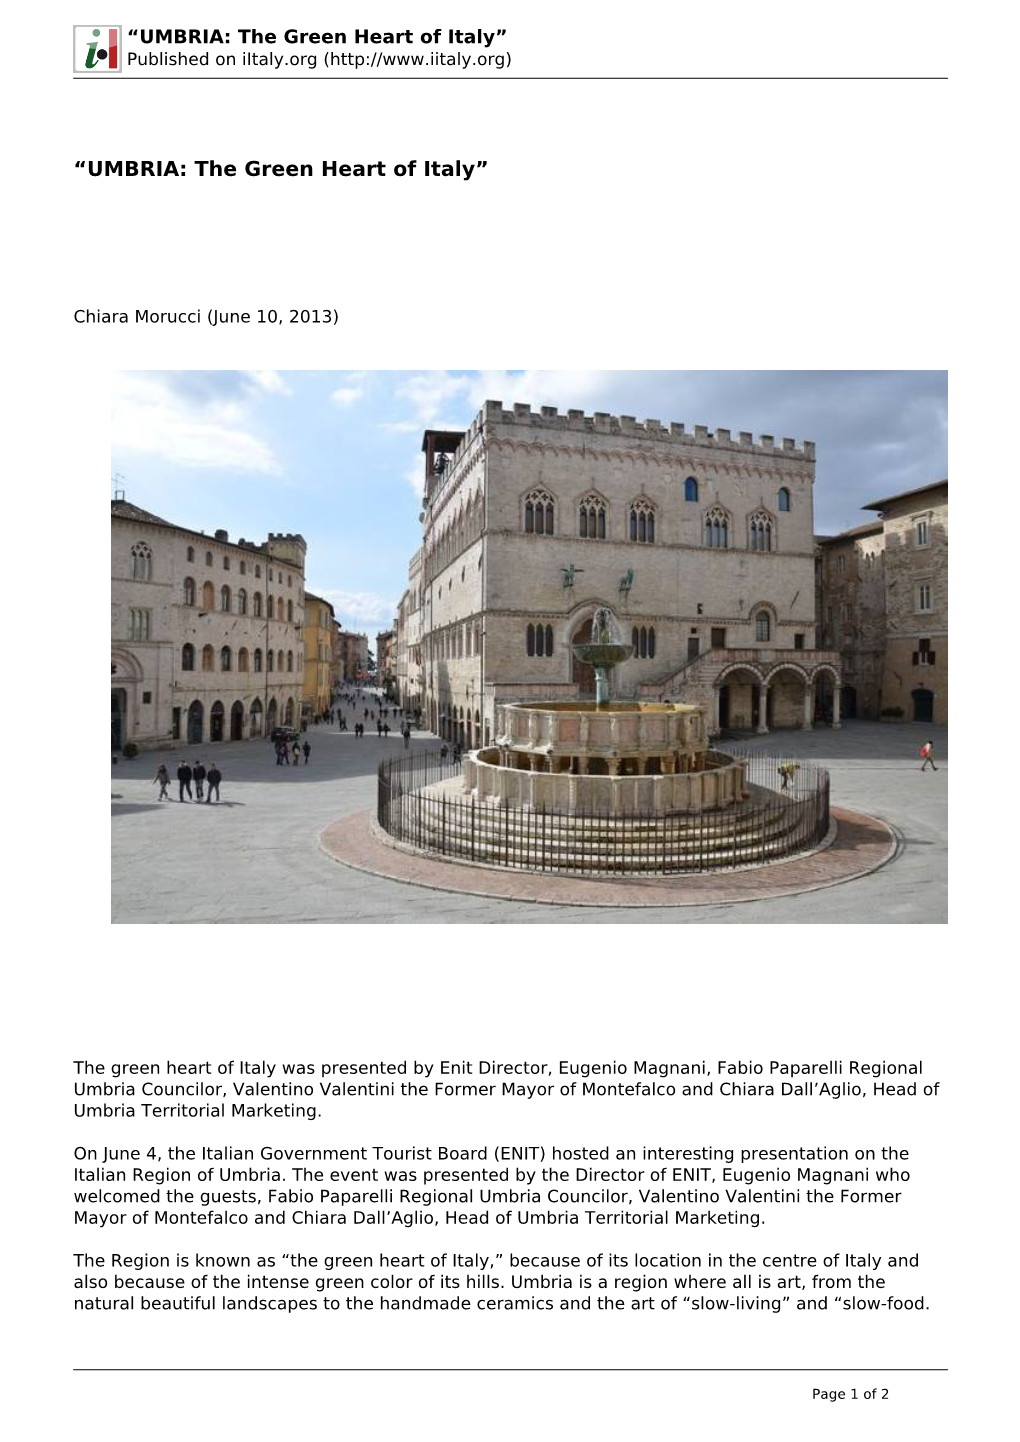 “UMBRIA: the Green Heart of Italy” Published on Iitaly.Org (